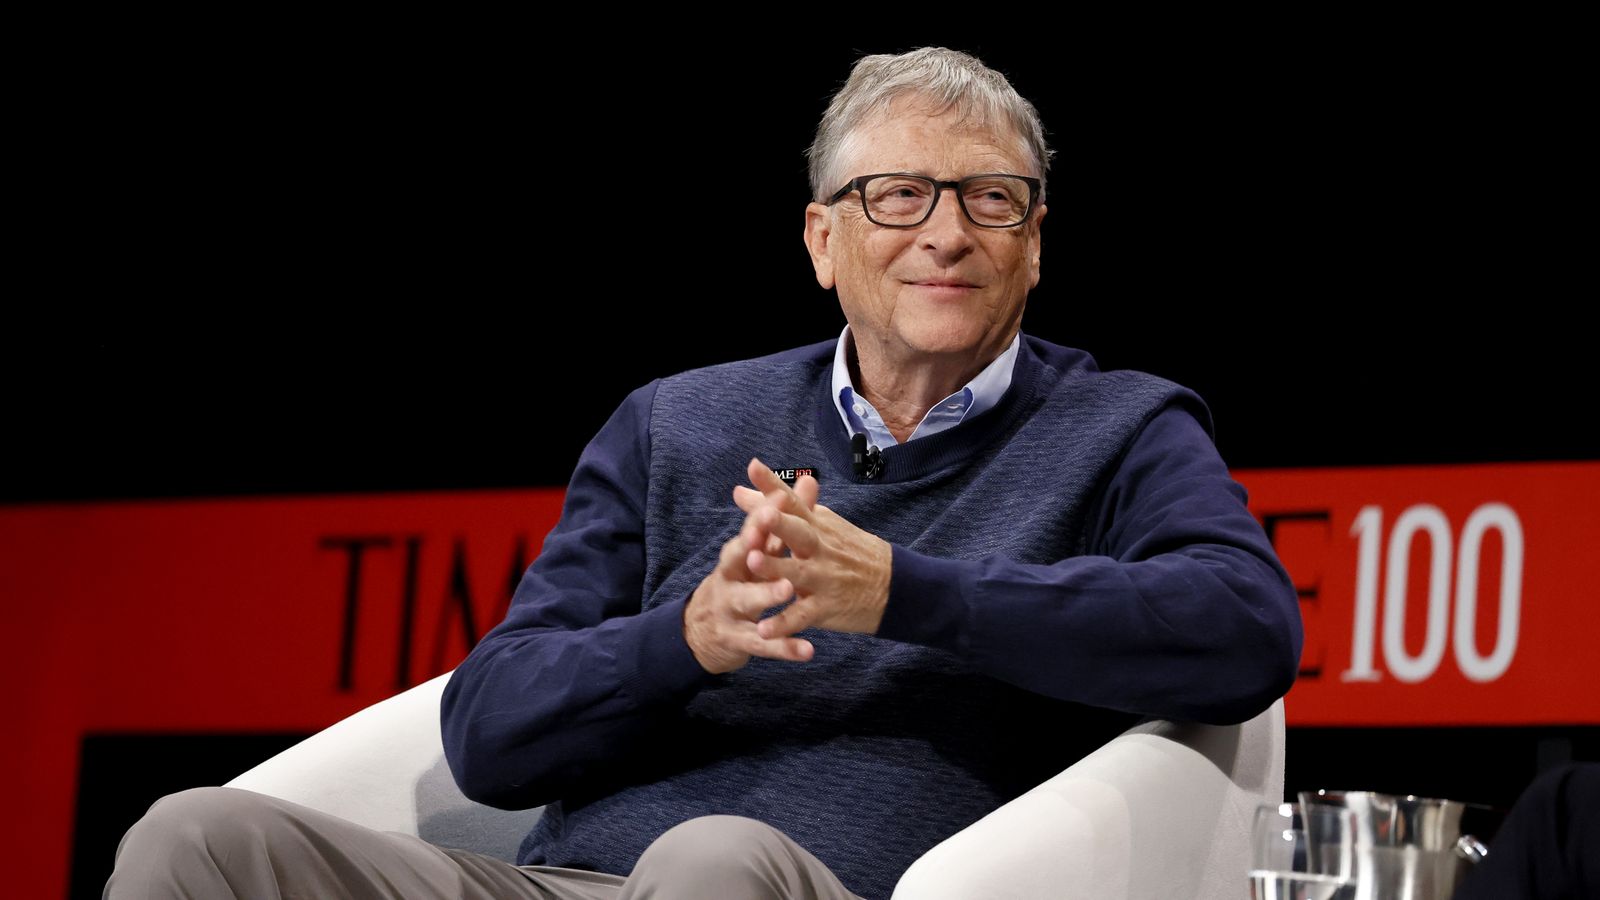 Cryptocurrencies, NFTs "based on greater fool theory," Bill Gates says